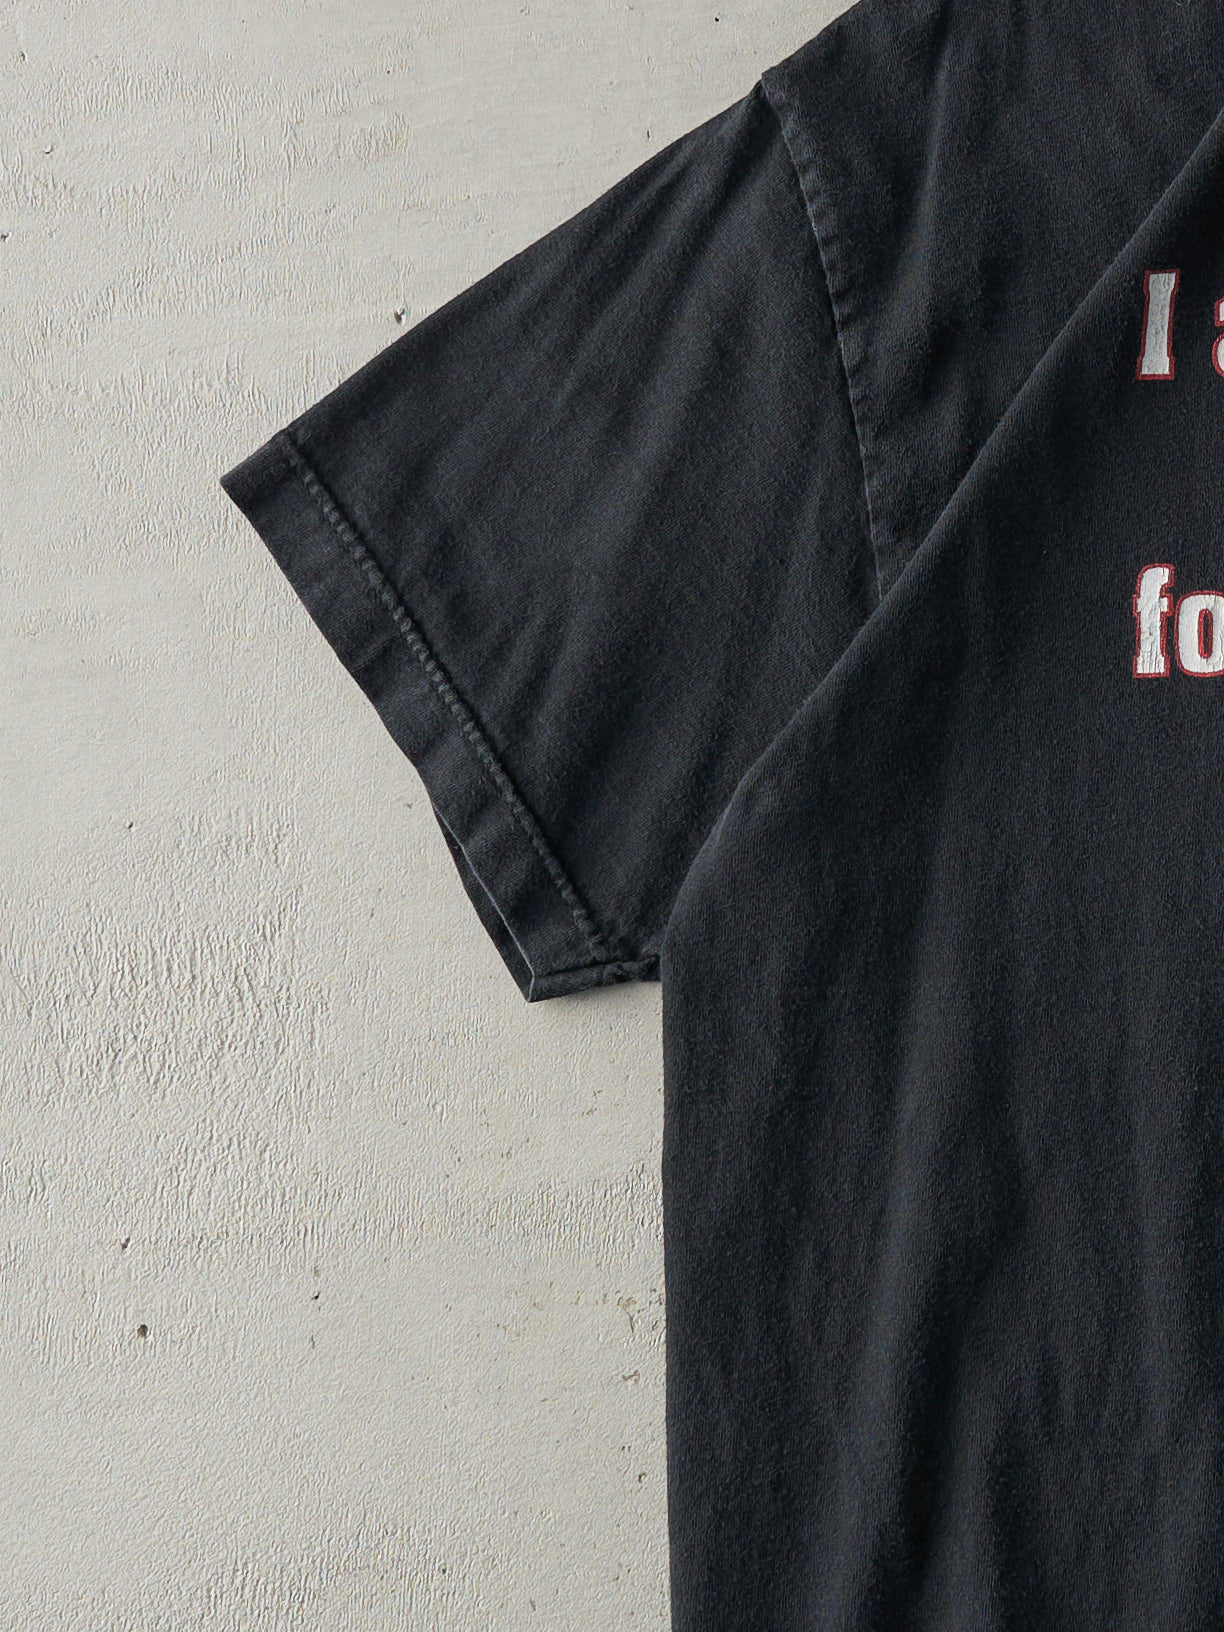 Vintage 03' Faded Black "I Am Not Like You" Tee (M/L)